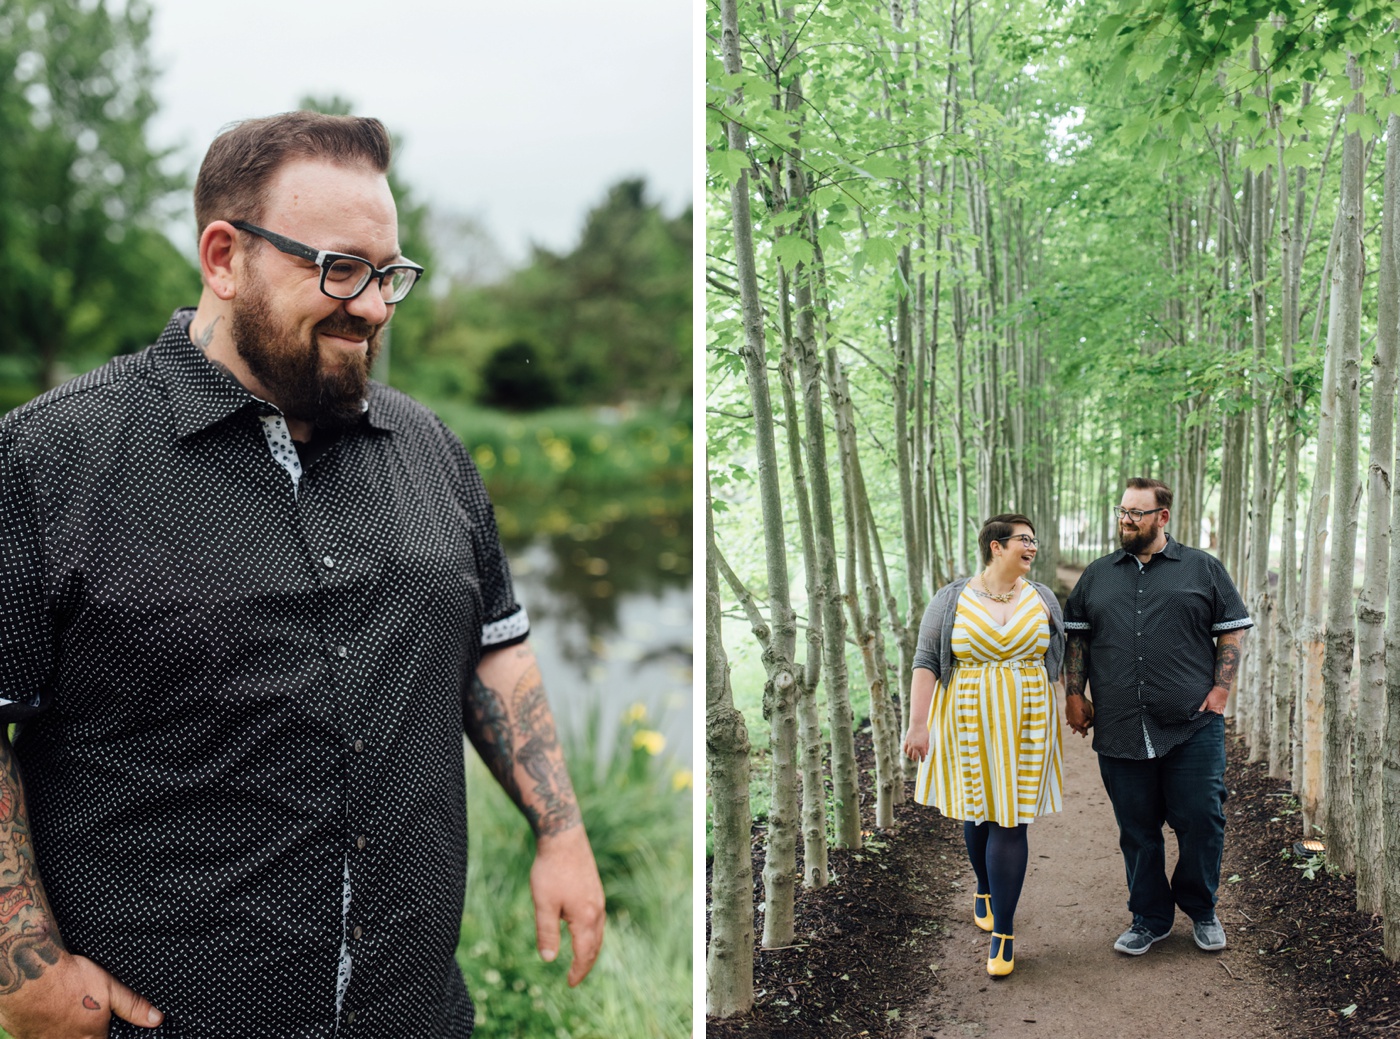 16 - Erin + Tim - Grounds for Sculpture - Hamilton New Jersey Engagement Session - Alison Dunn Photography